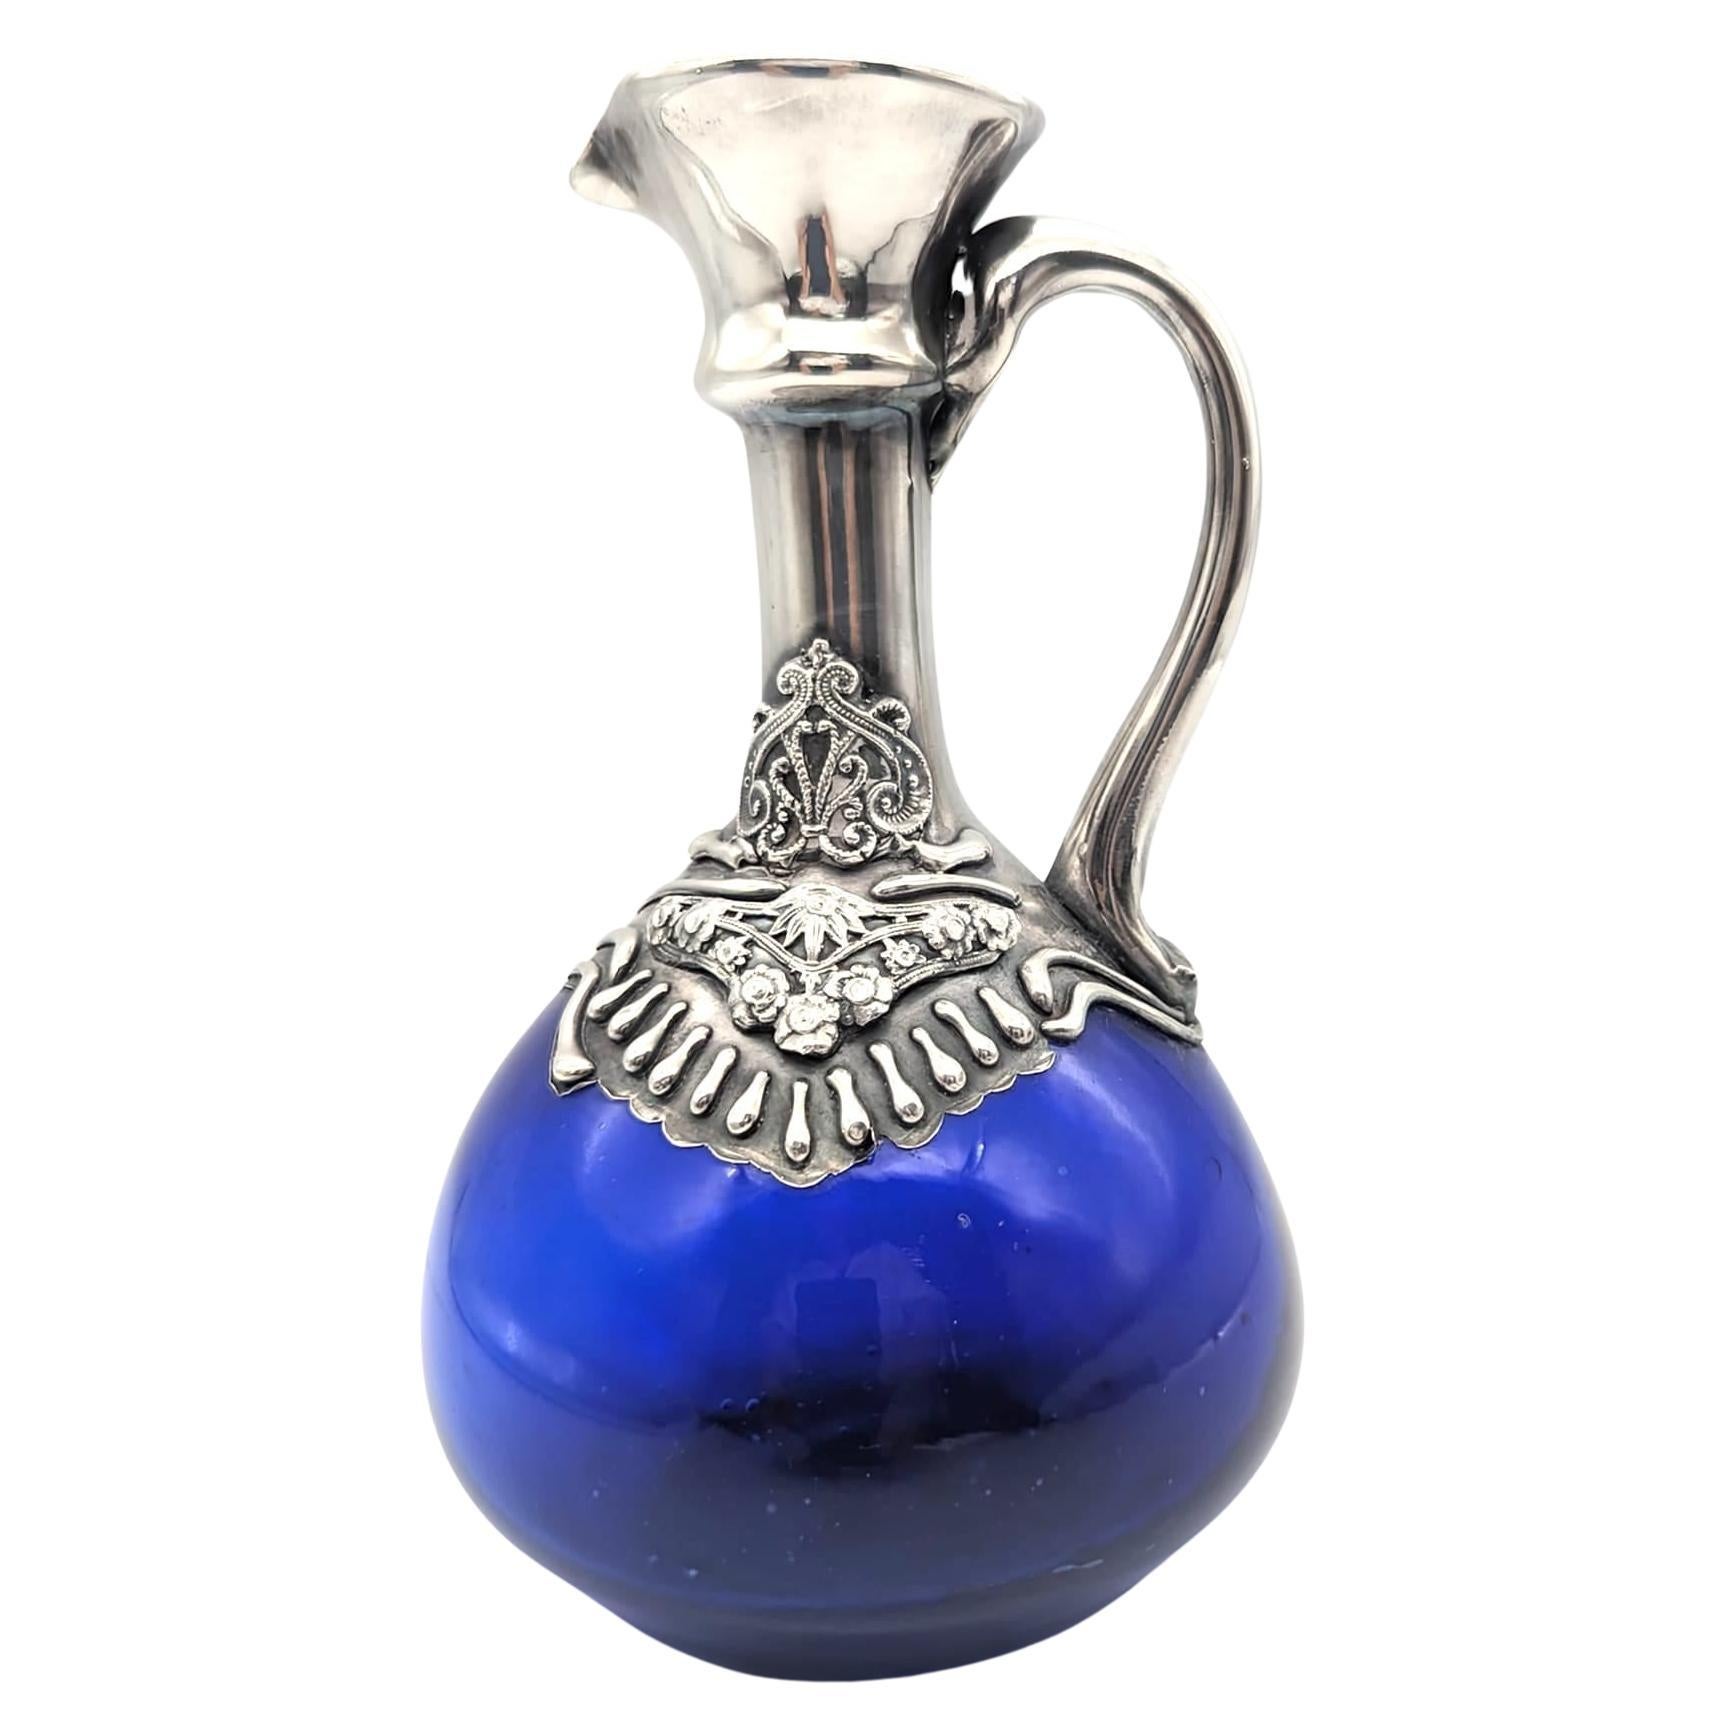 Israeli Blown Glass & Sterling Silver Carafe Pitcher